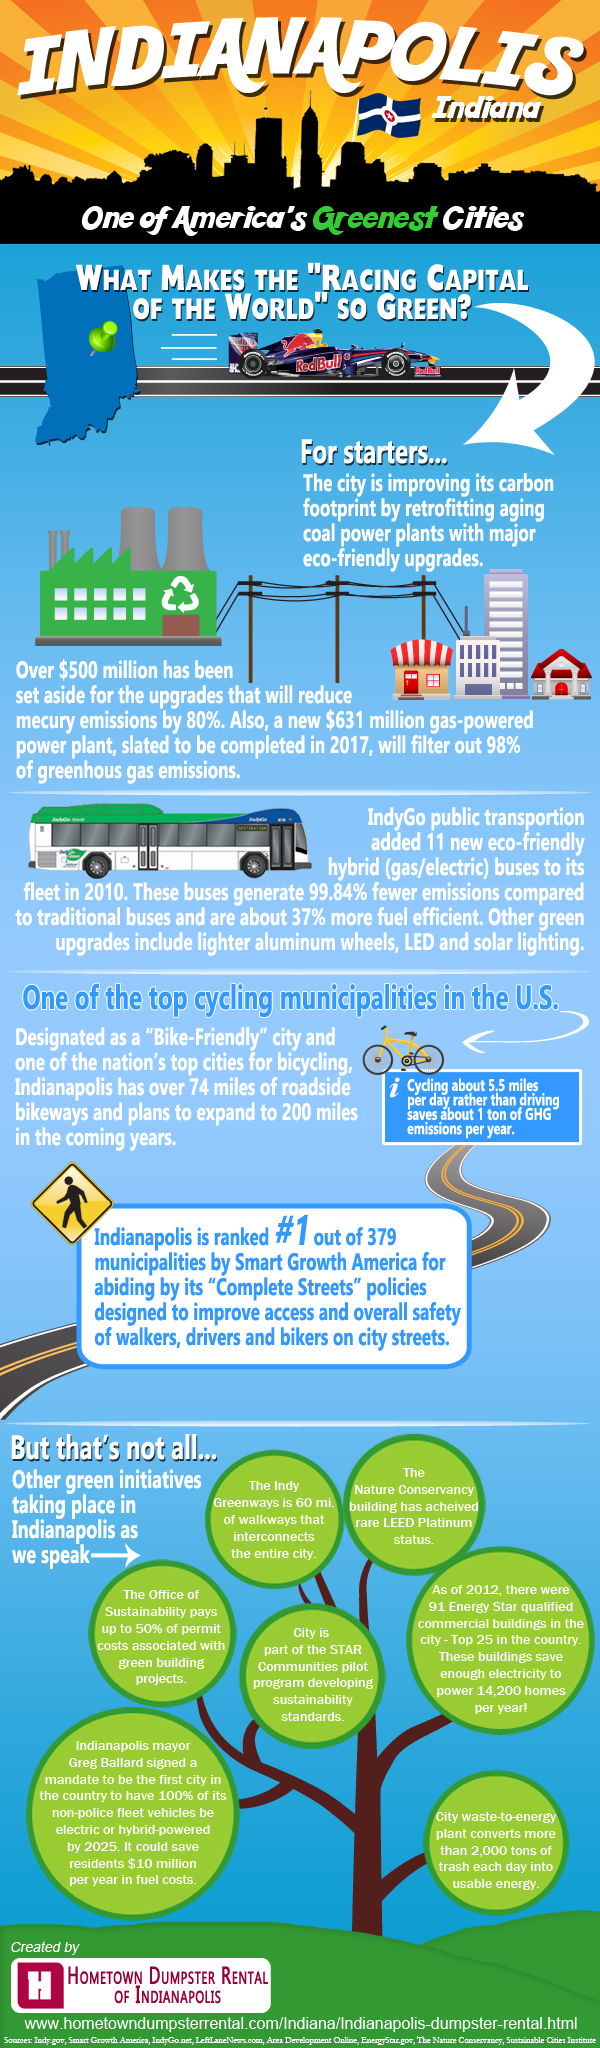 Cities going green - Indianapolis infographic